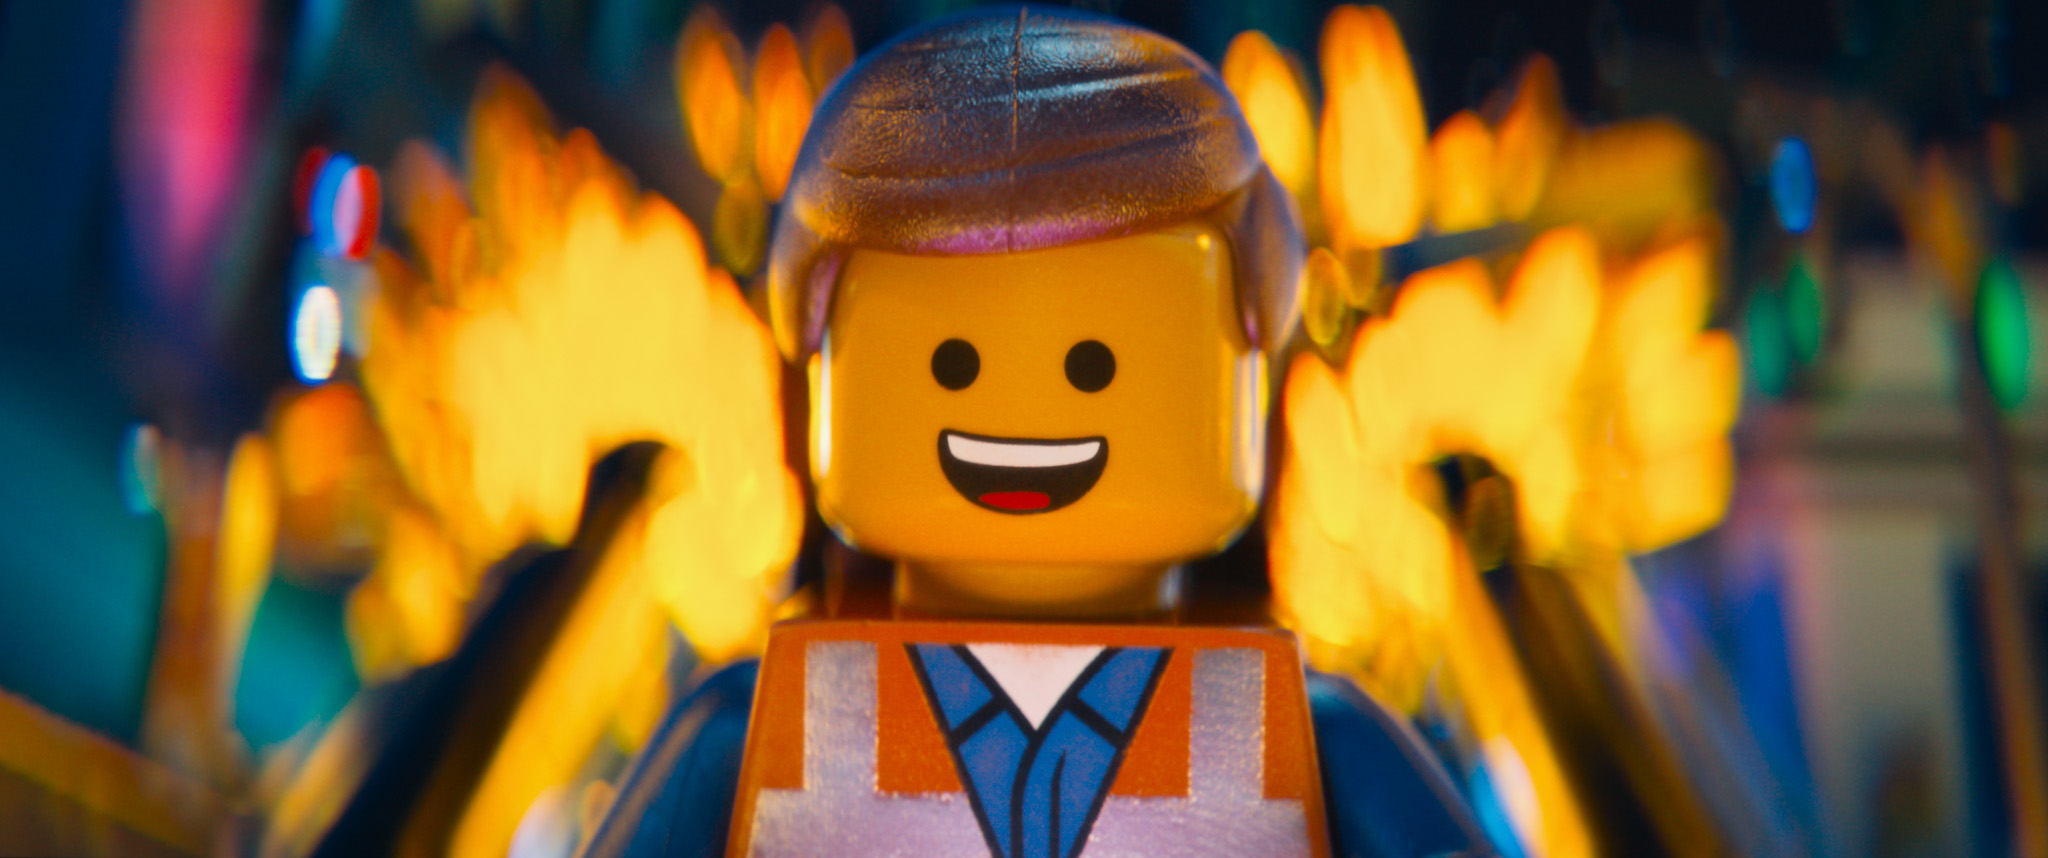 The LEGO Movie: The Best Animated Film of 2014